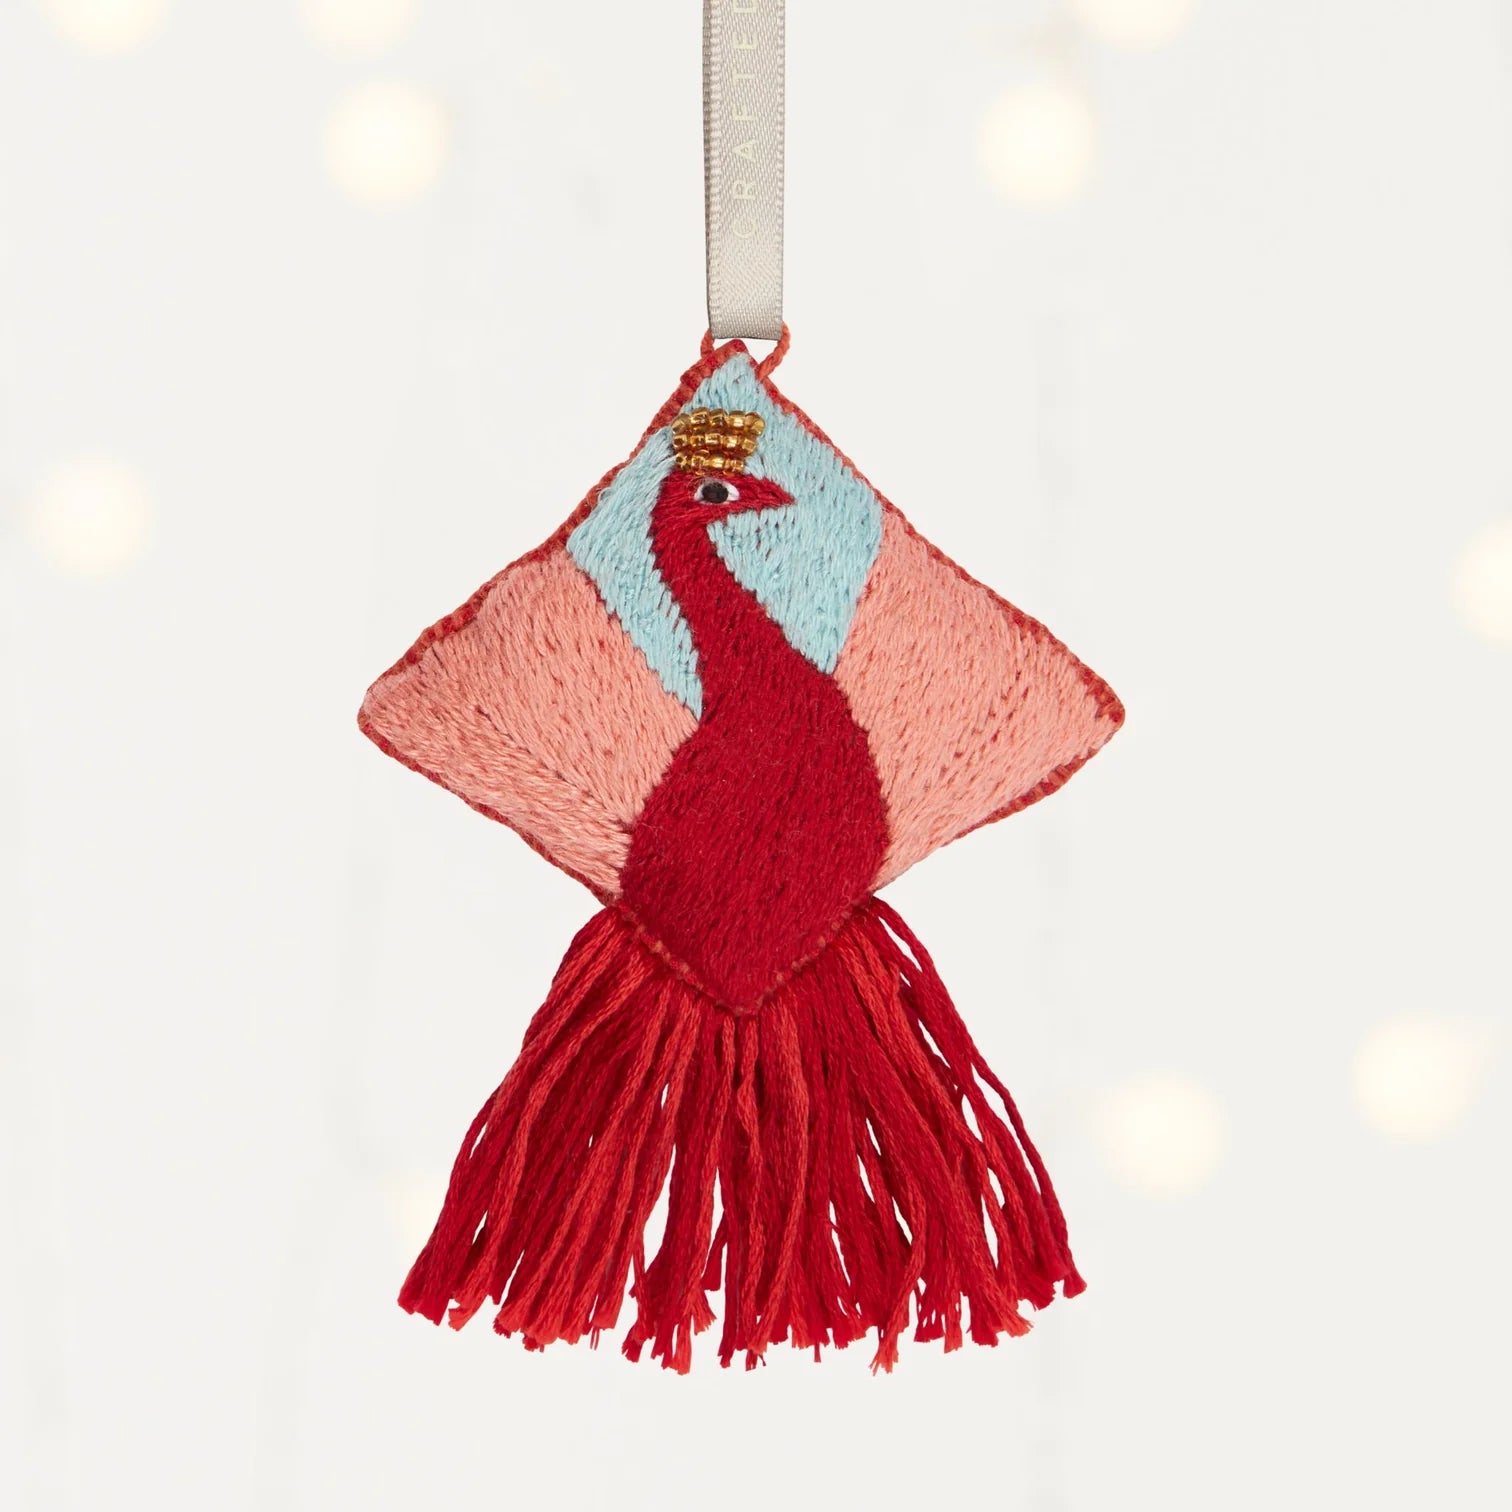 Made 51 Holiday Collection - Splendid Peacock Ornament